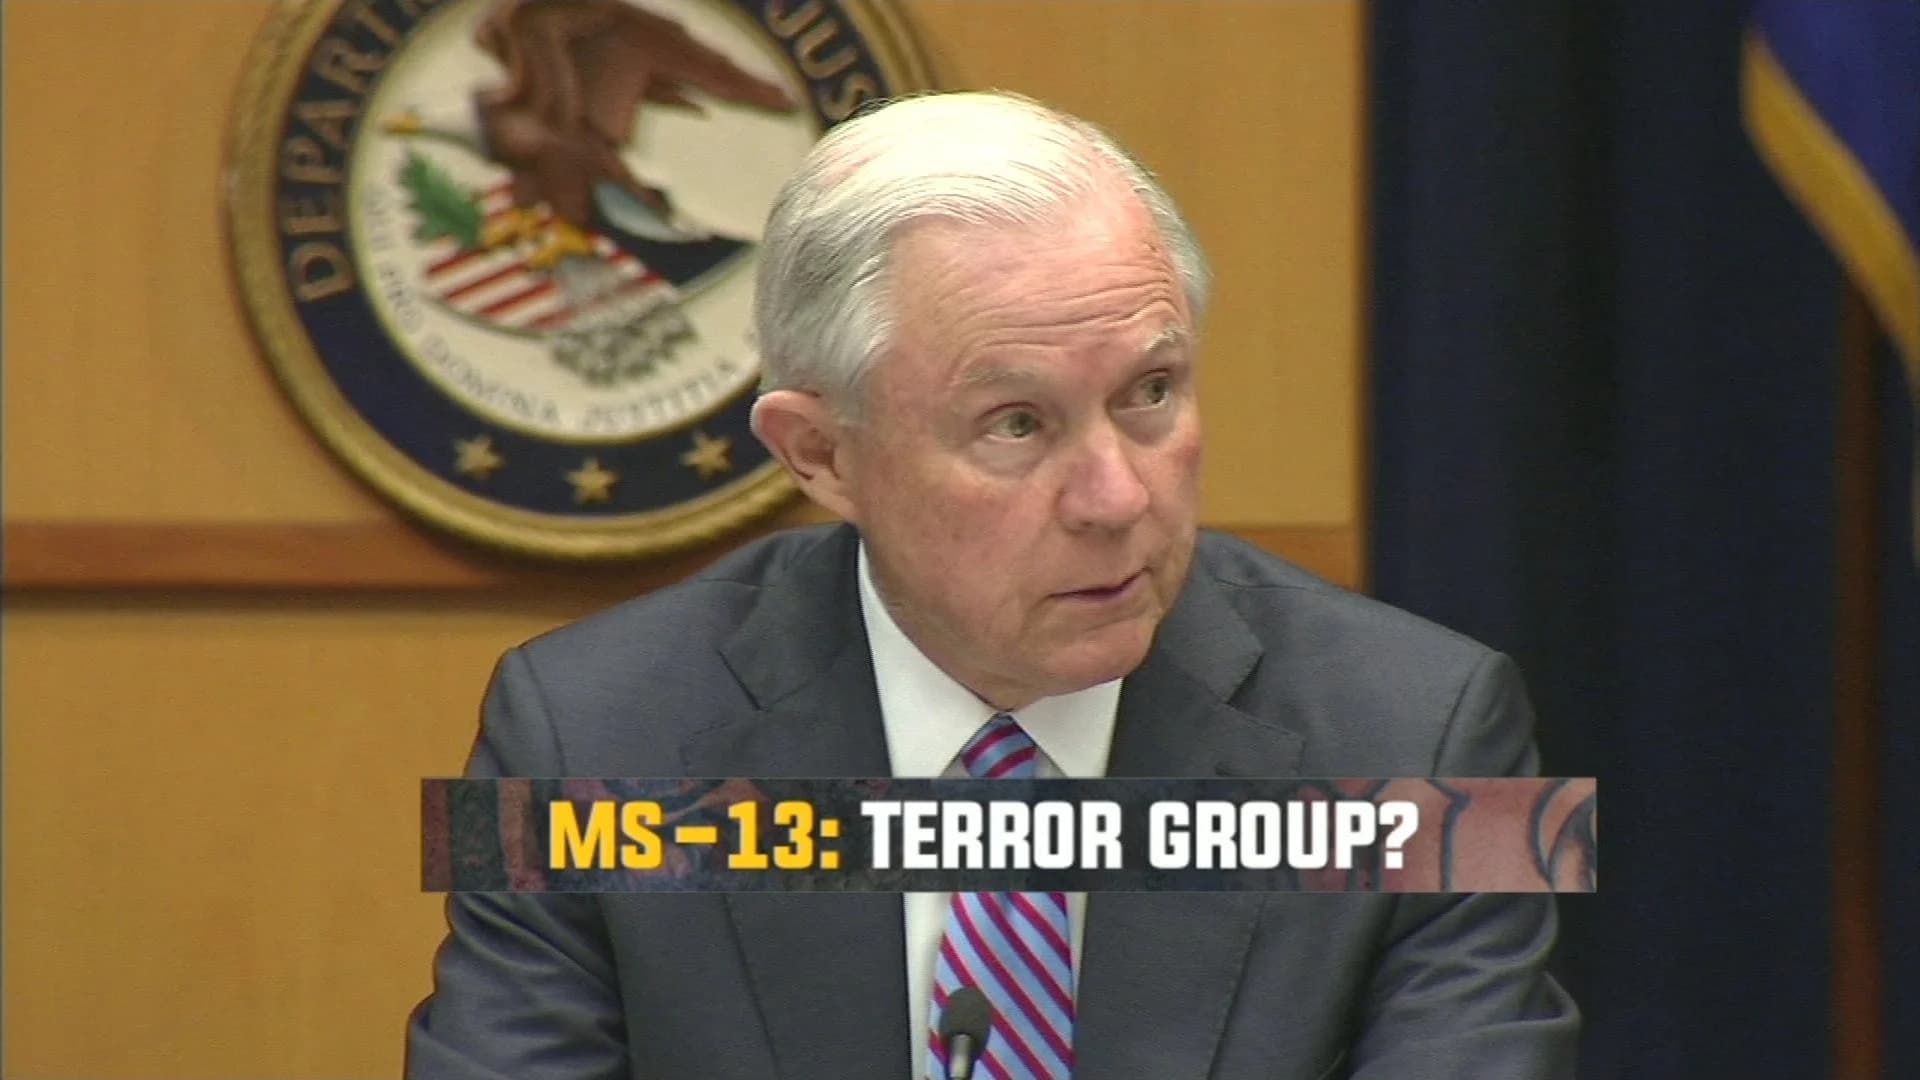 AG Sessions: MS-13 could qualify as foreign terror group